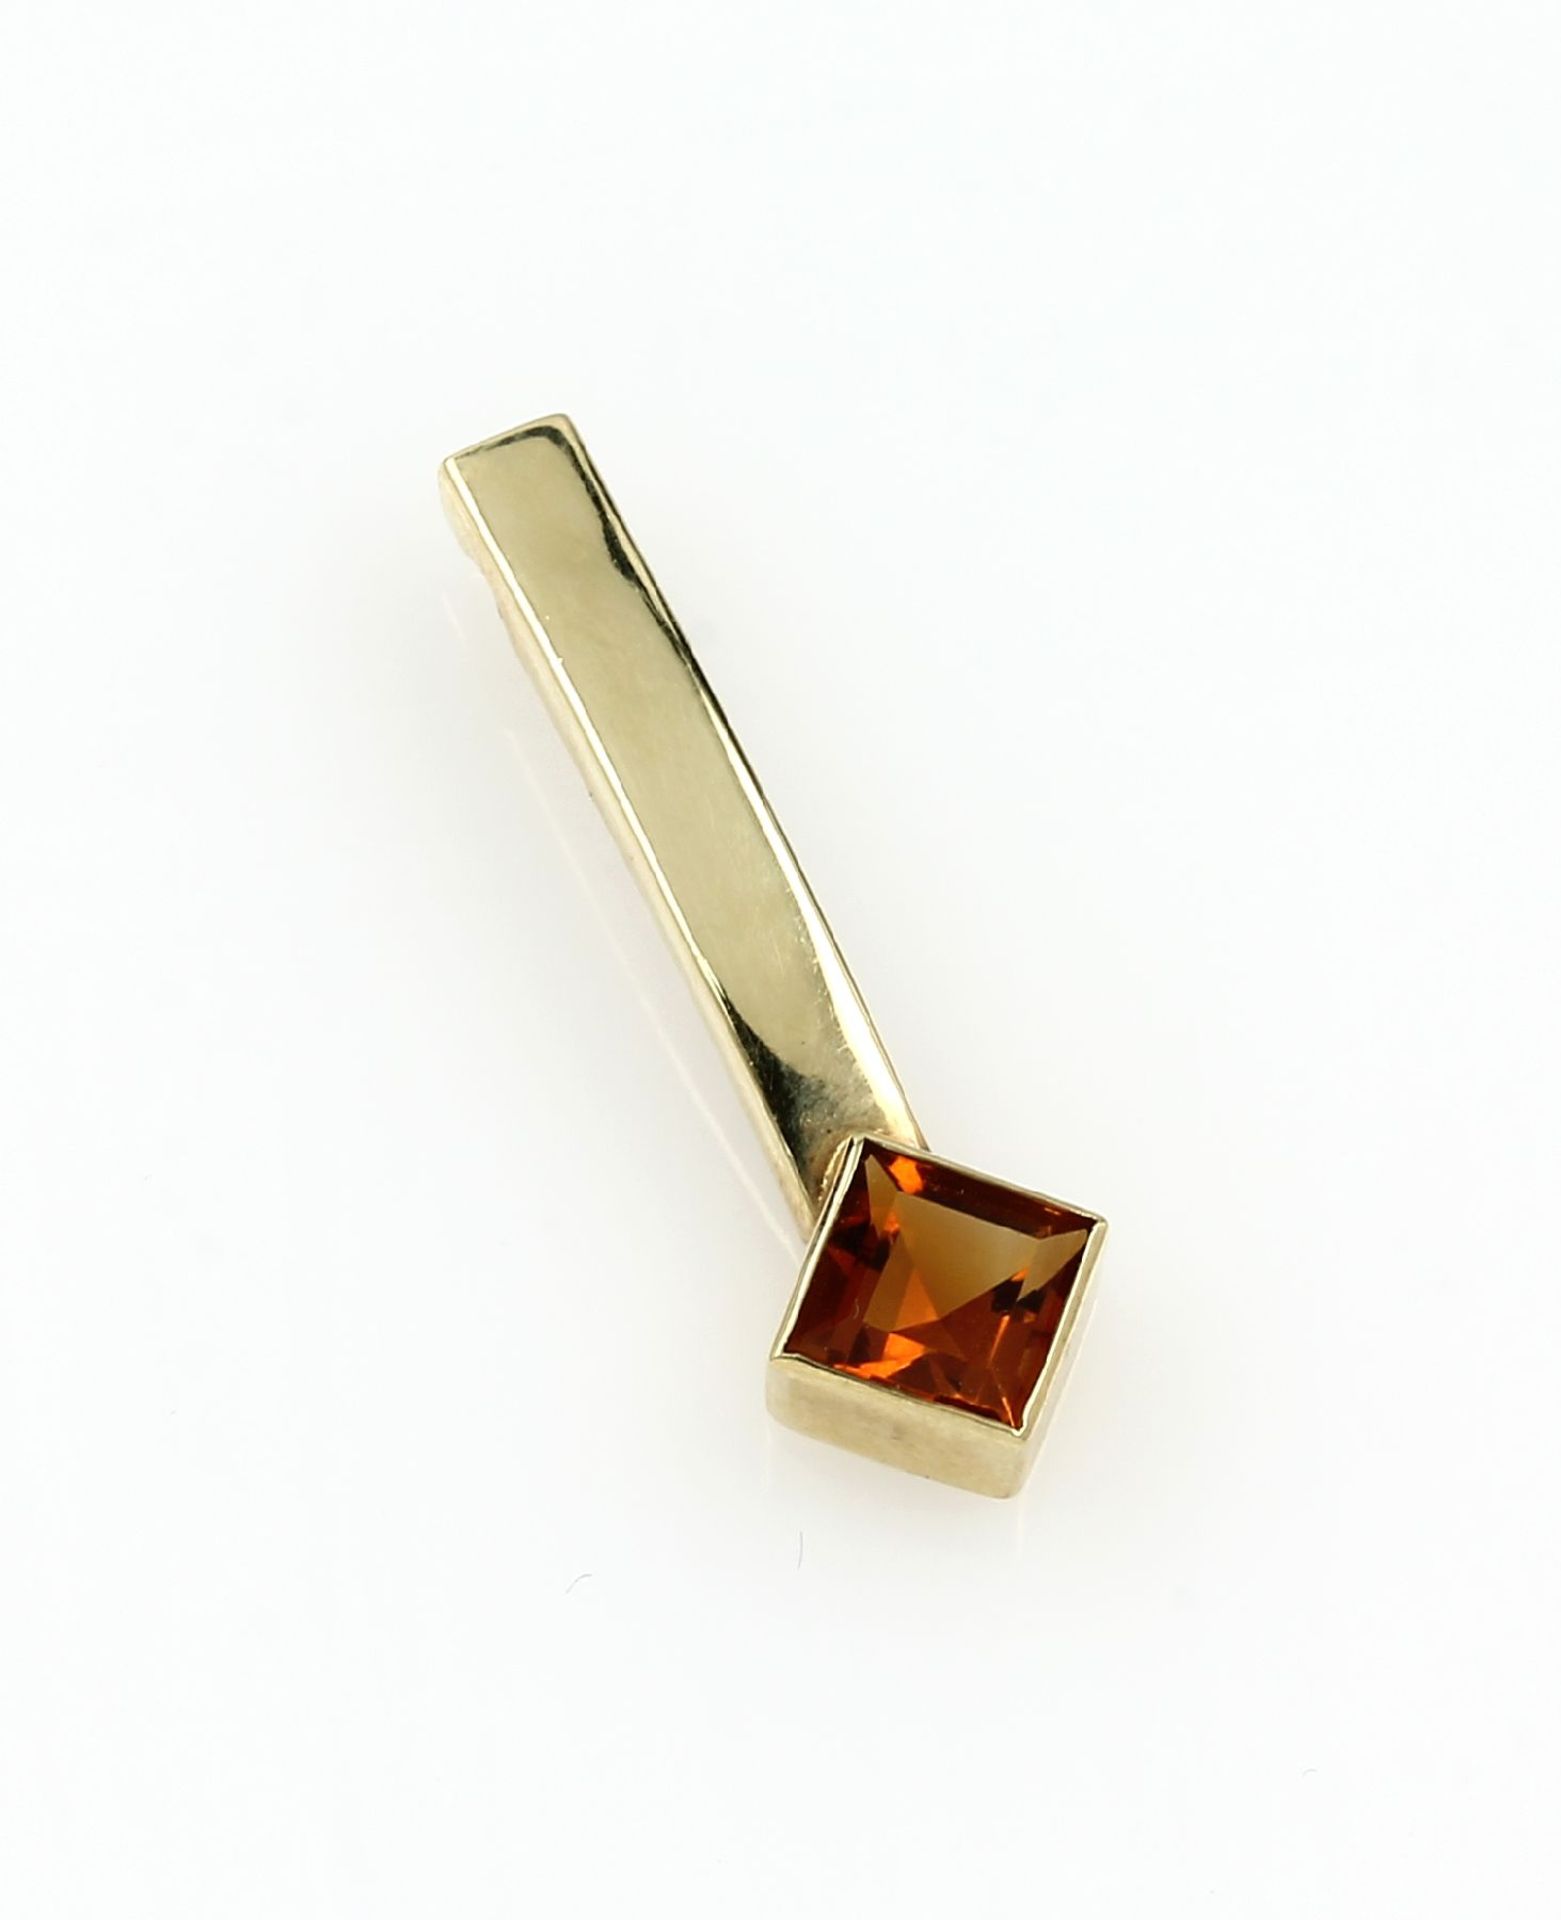 14 kt gold pendant with citrine , YG 585/000, bevelled citrine square, nice colour,l. approx. 2.5